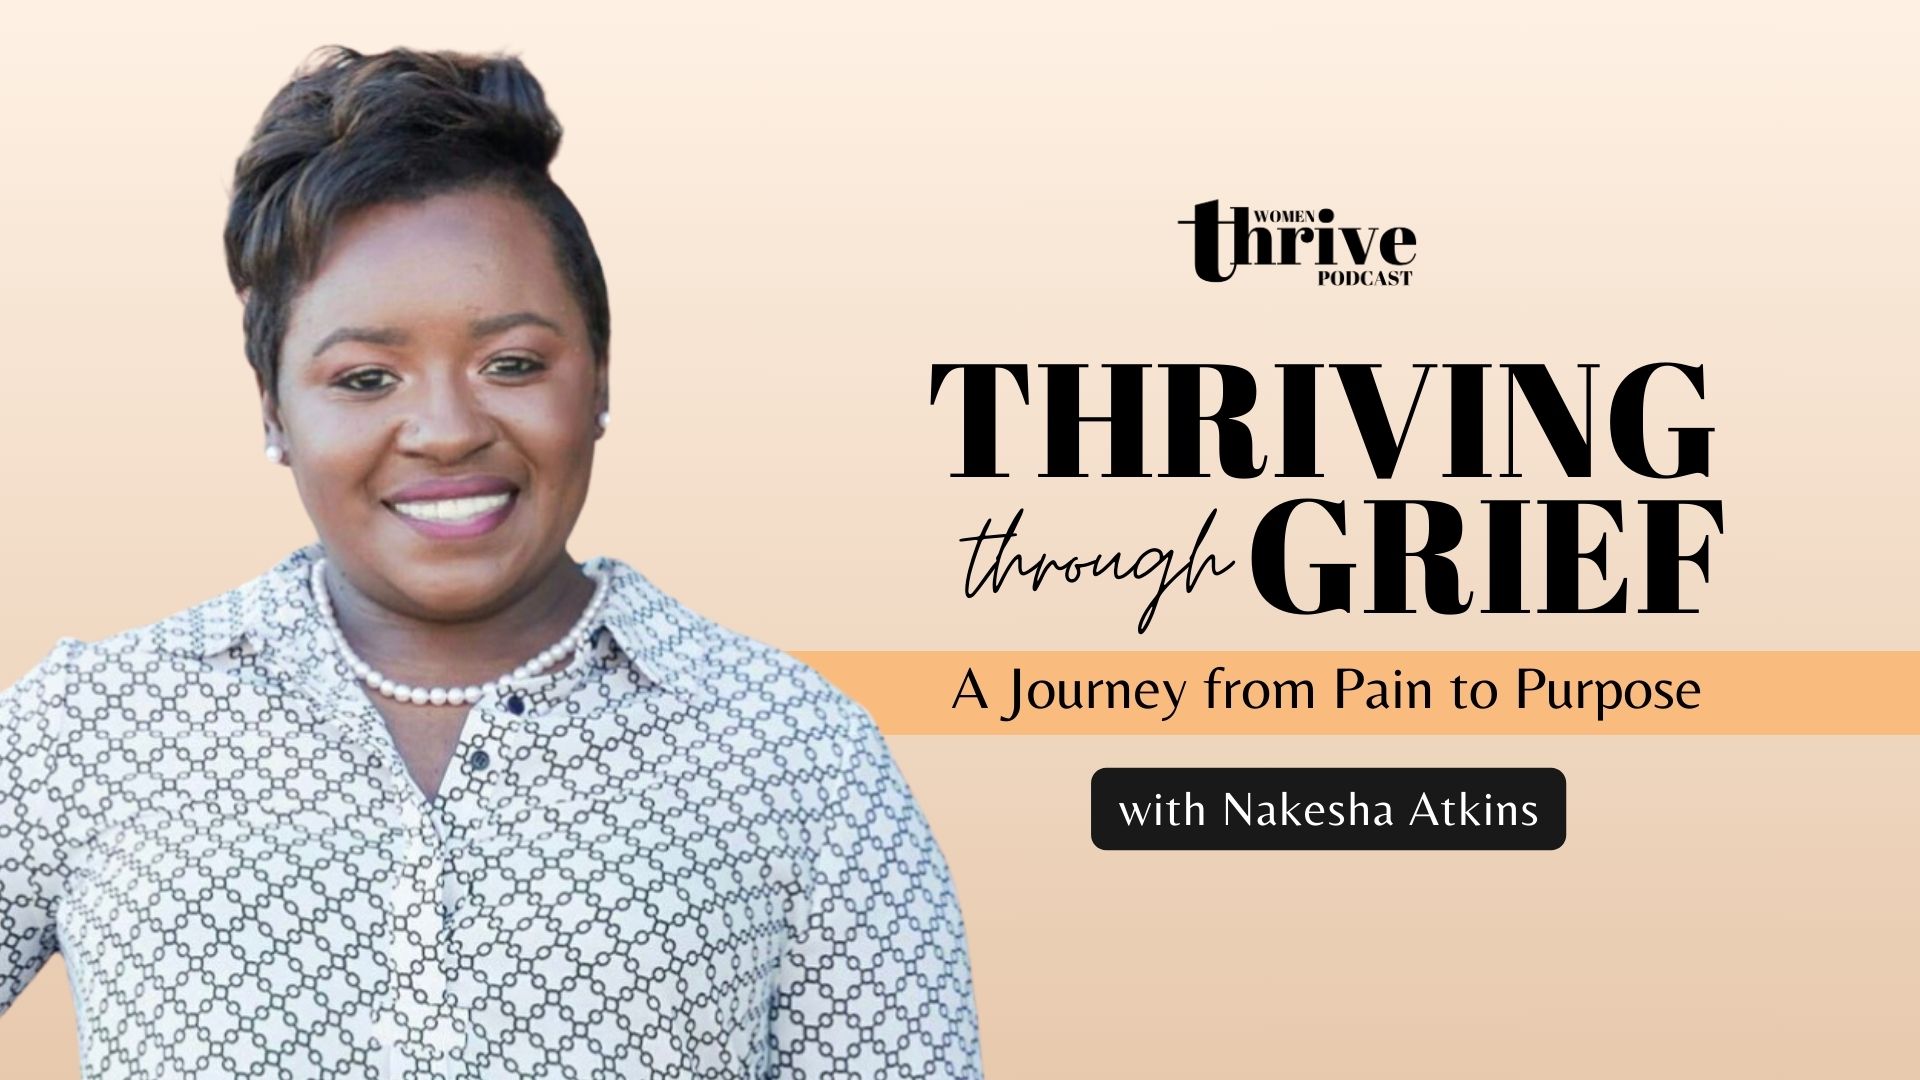 Thriving Through Grief: A Journey from Pain to Purpose with Nakesha Atkins